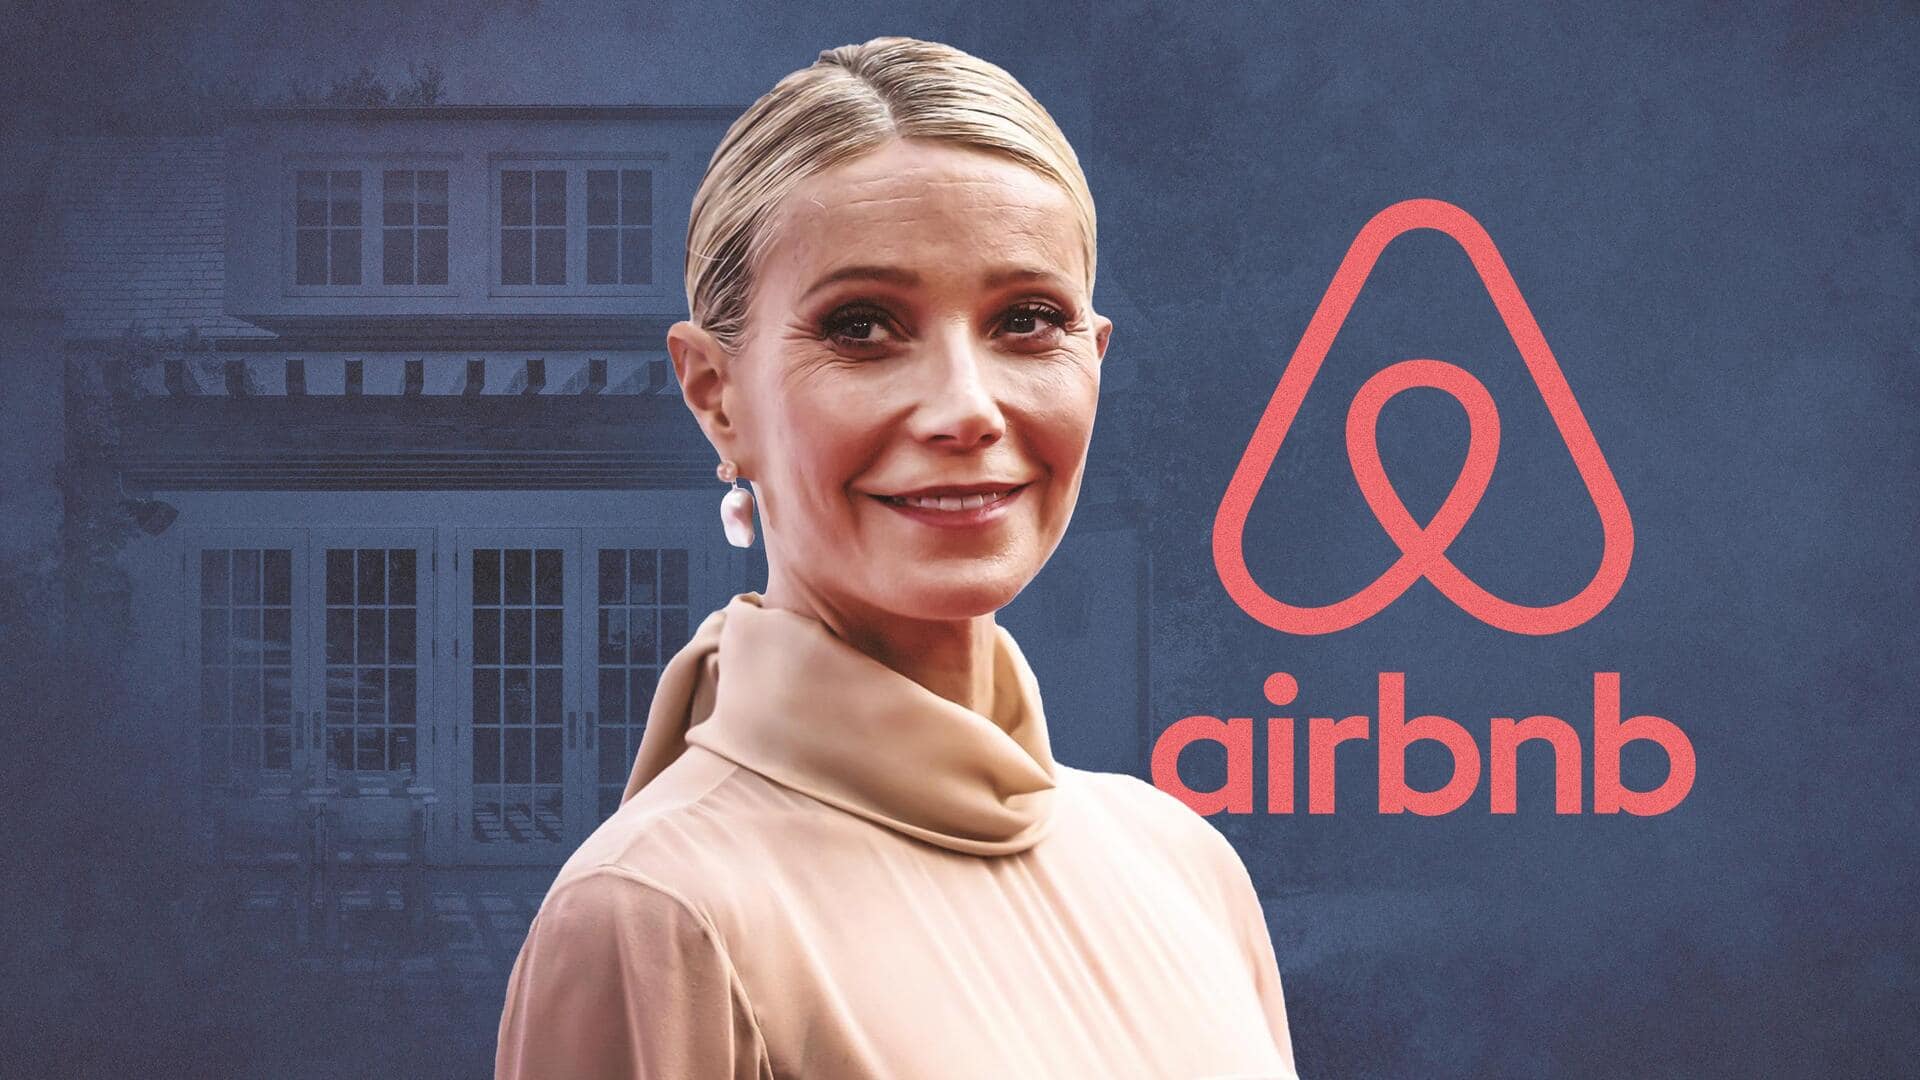 Gwyneth Paltrow lists her California guesthouse on Airbnb for $0